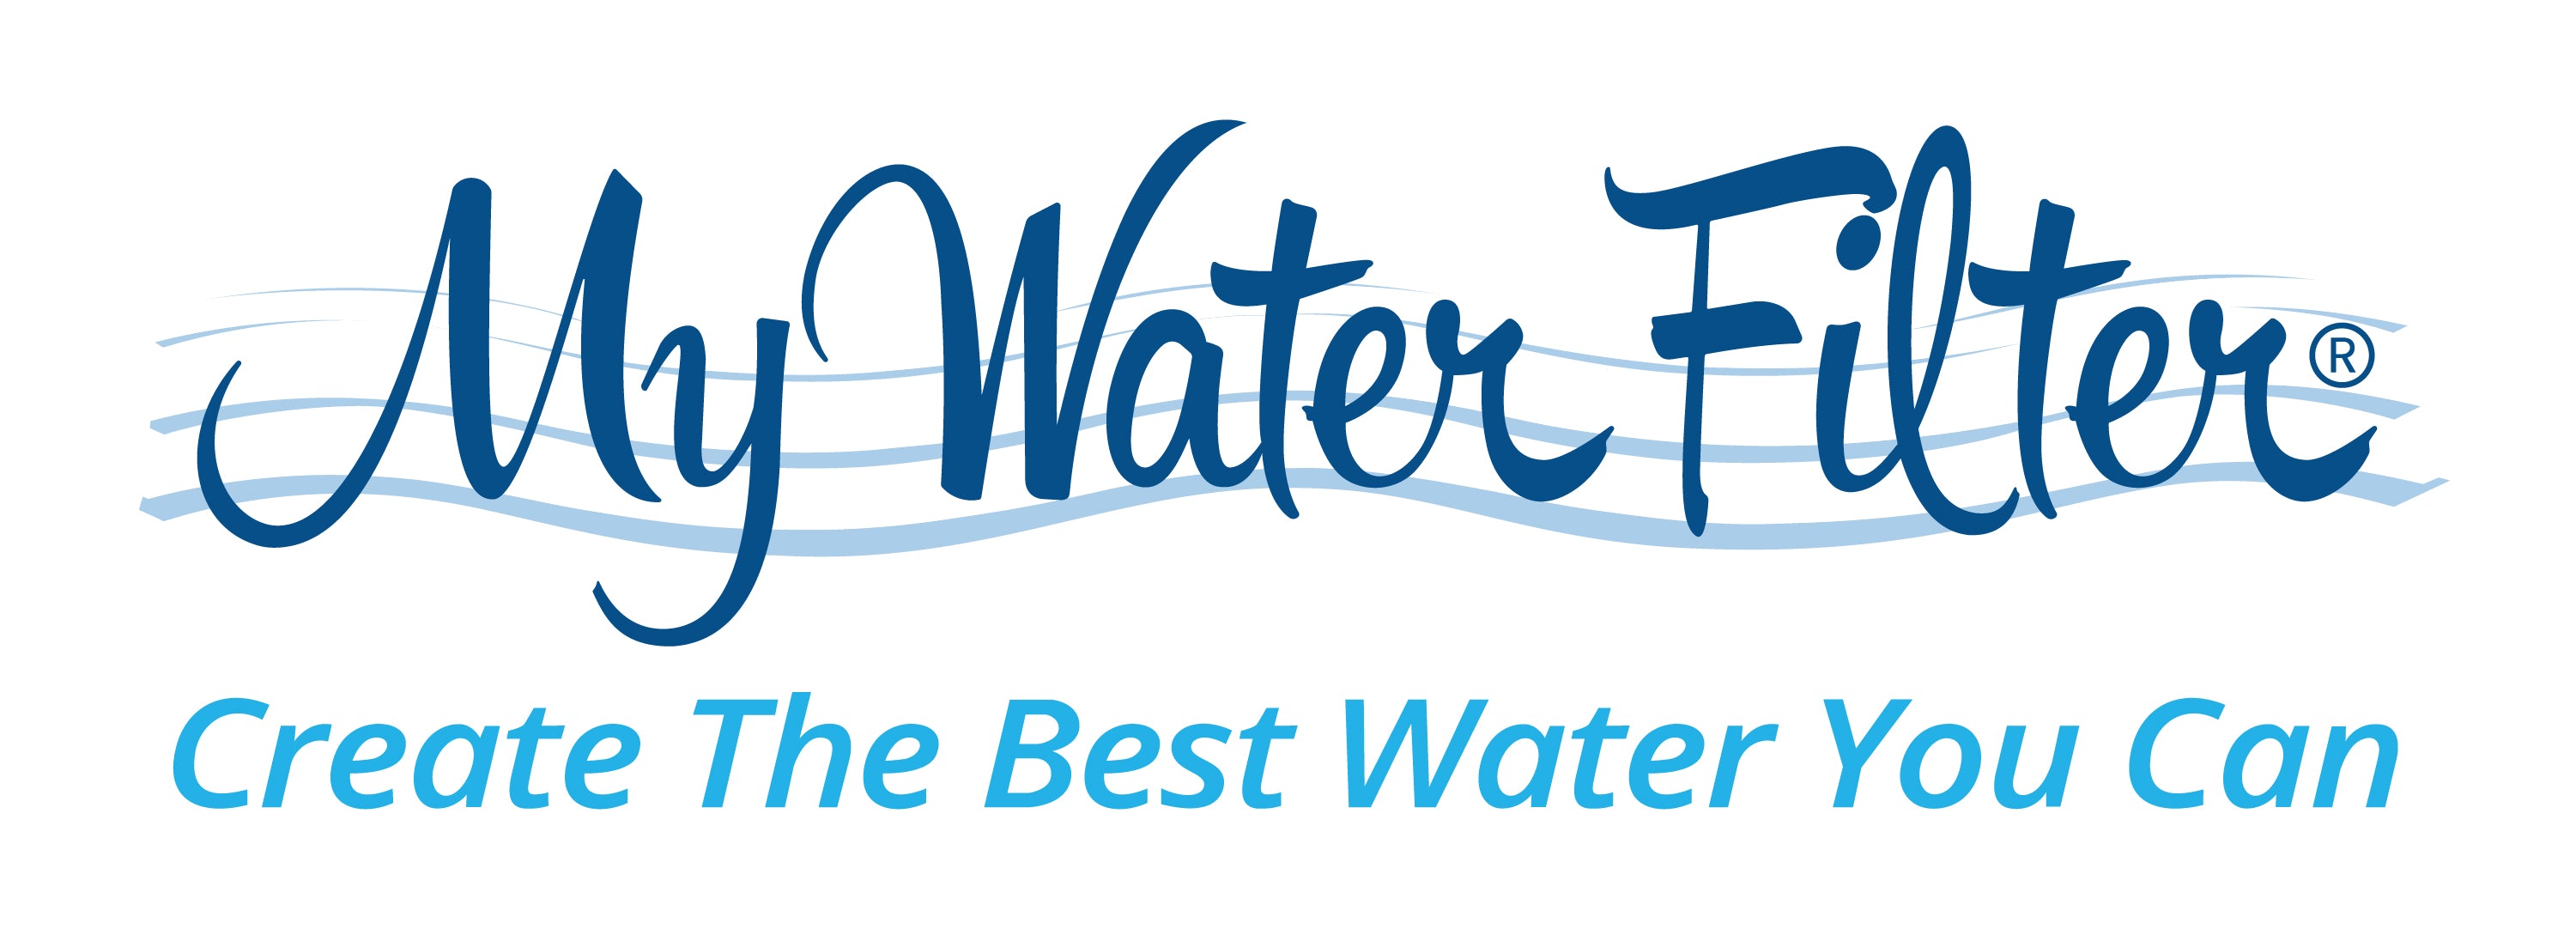 files/My_Water_Filter_logos_with_trademark_symbol_revise_fc0287a3-1070-43ad-977e-0a8e643f16c8.jpg